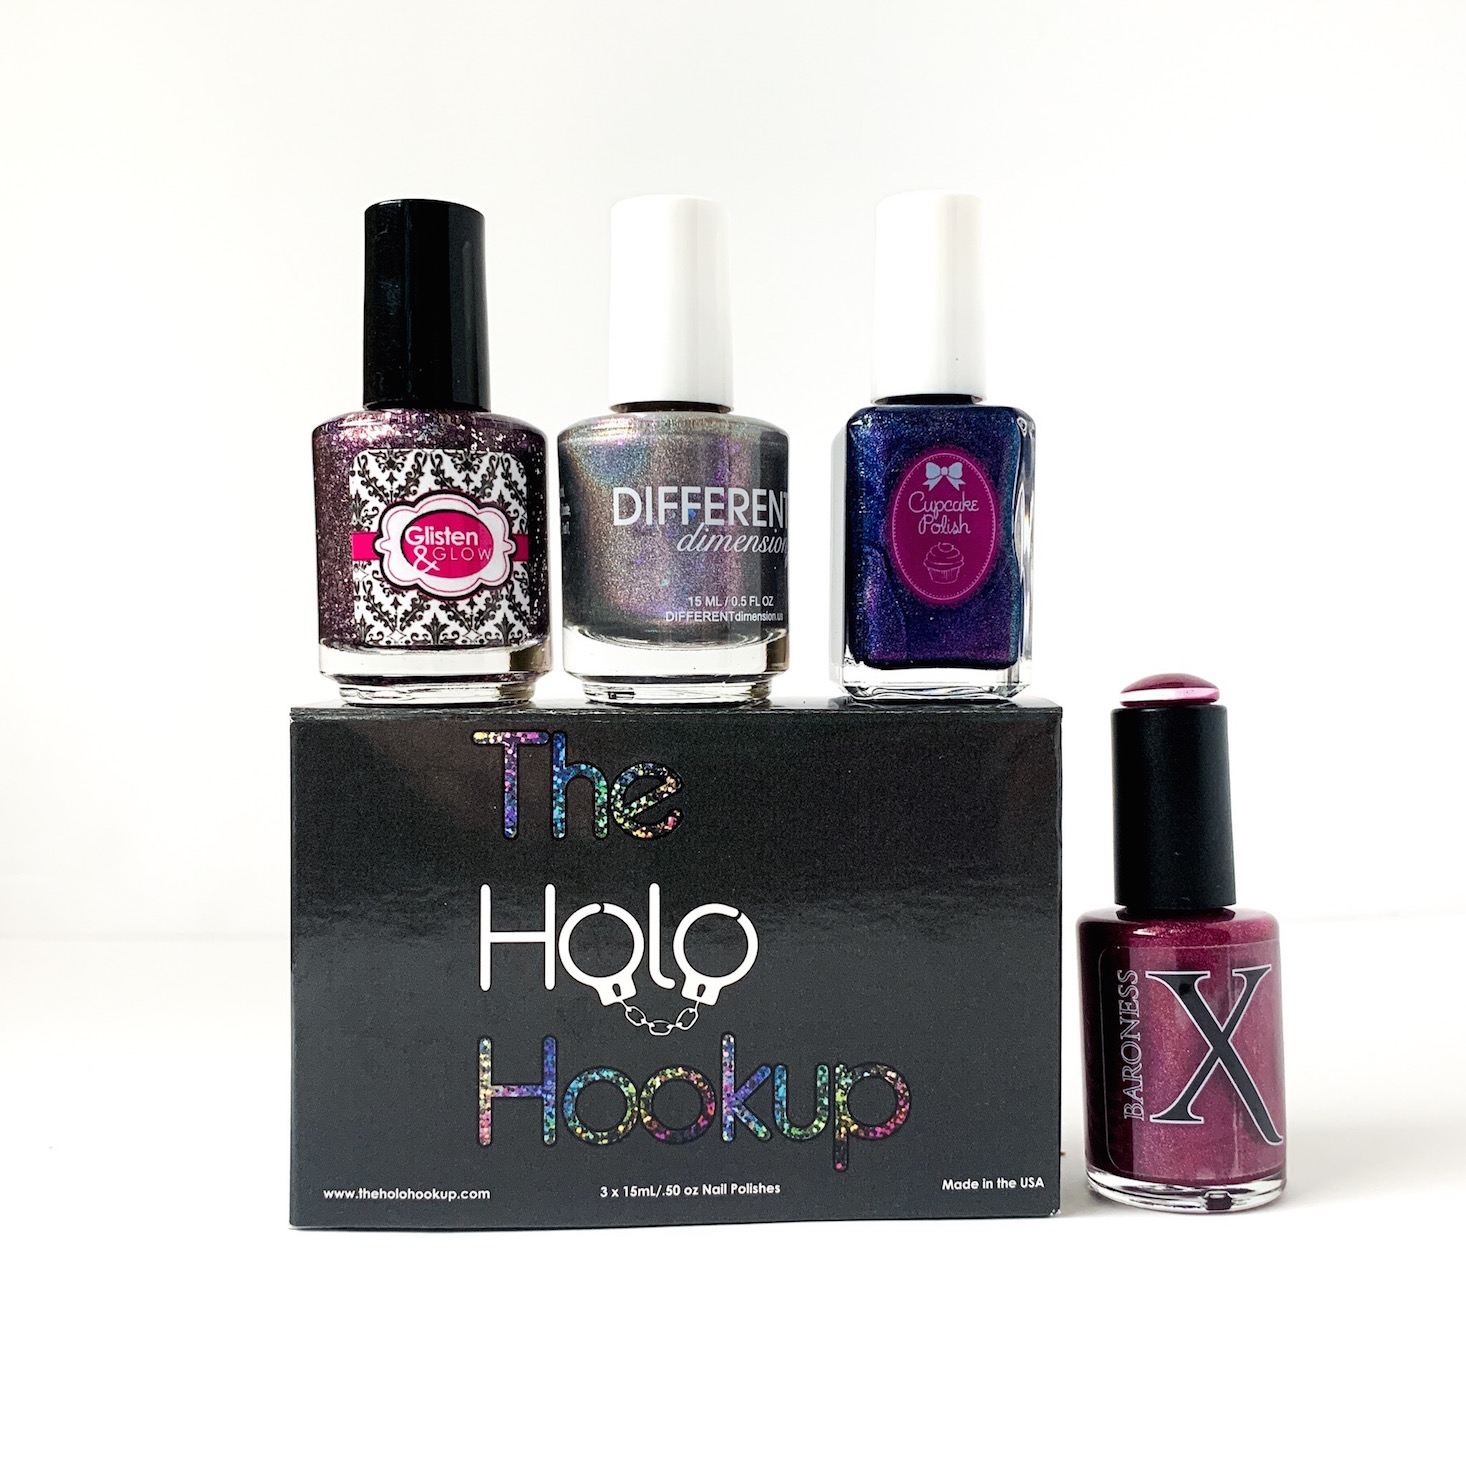 The Holo Hookup “Gothic Romance” Review – February 2019